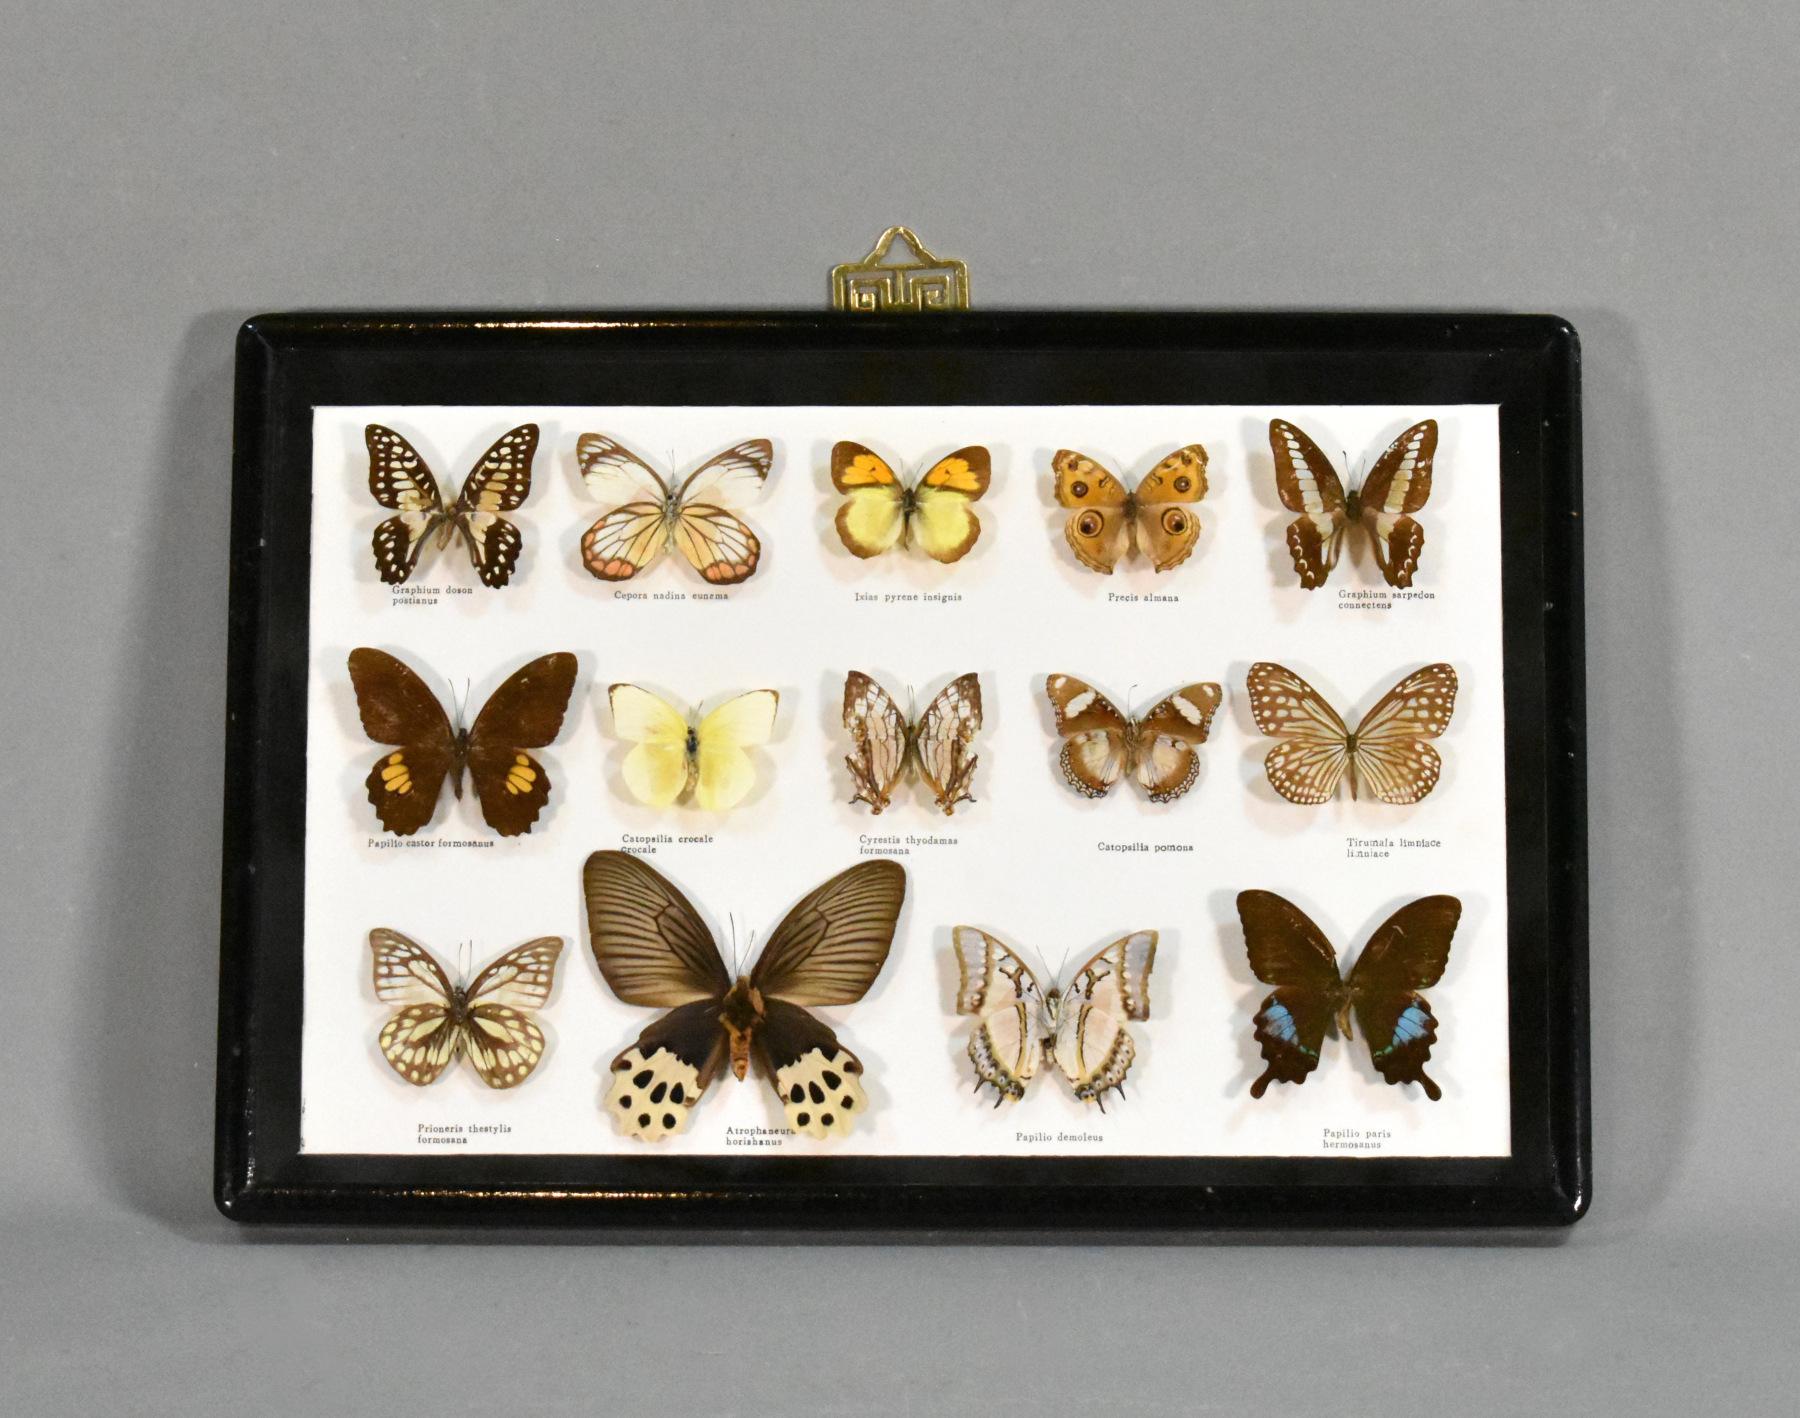 Butterfly Entomology Taxidermy display case

A beautiful collection of butterflies presented in a custom-made glazed display case with a rear hanging hook.

All fourteen specimens have been identified and marked with their Latin names.

Height: 32